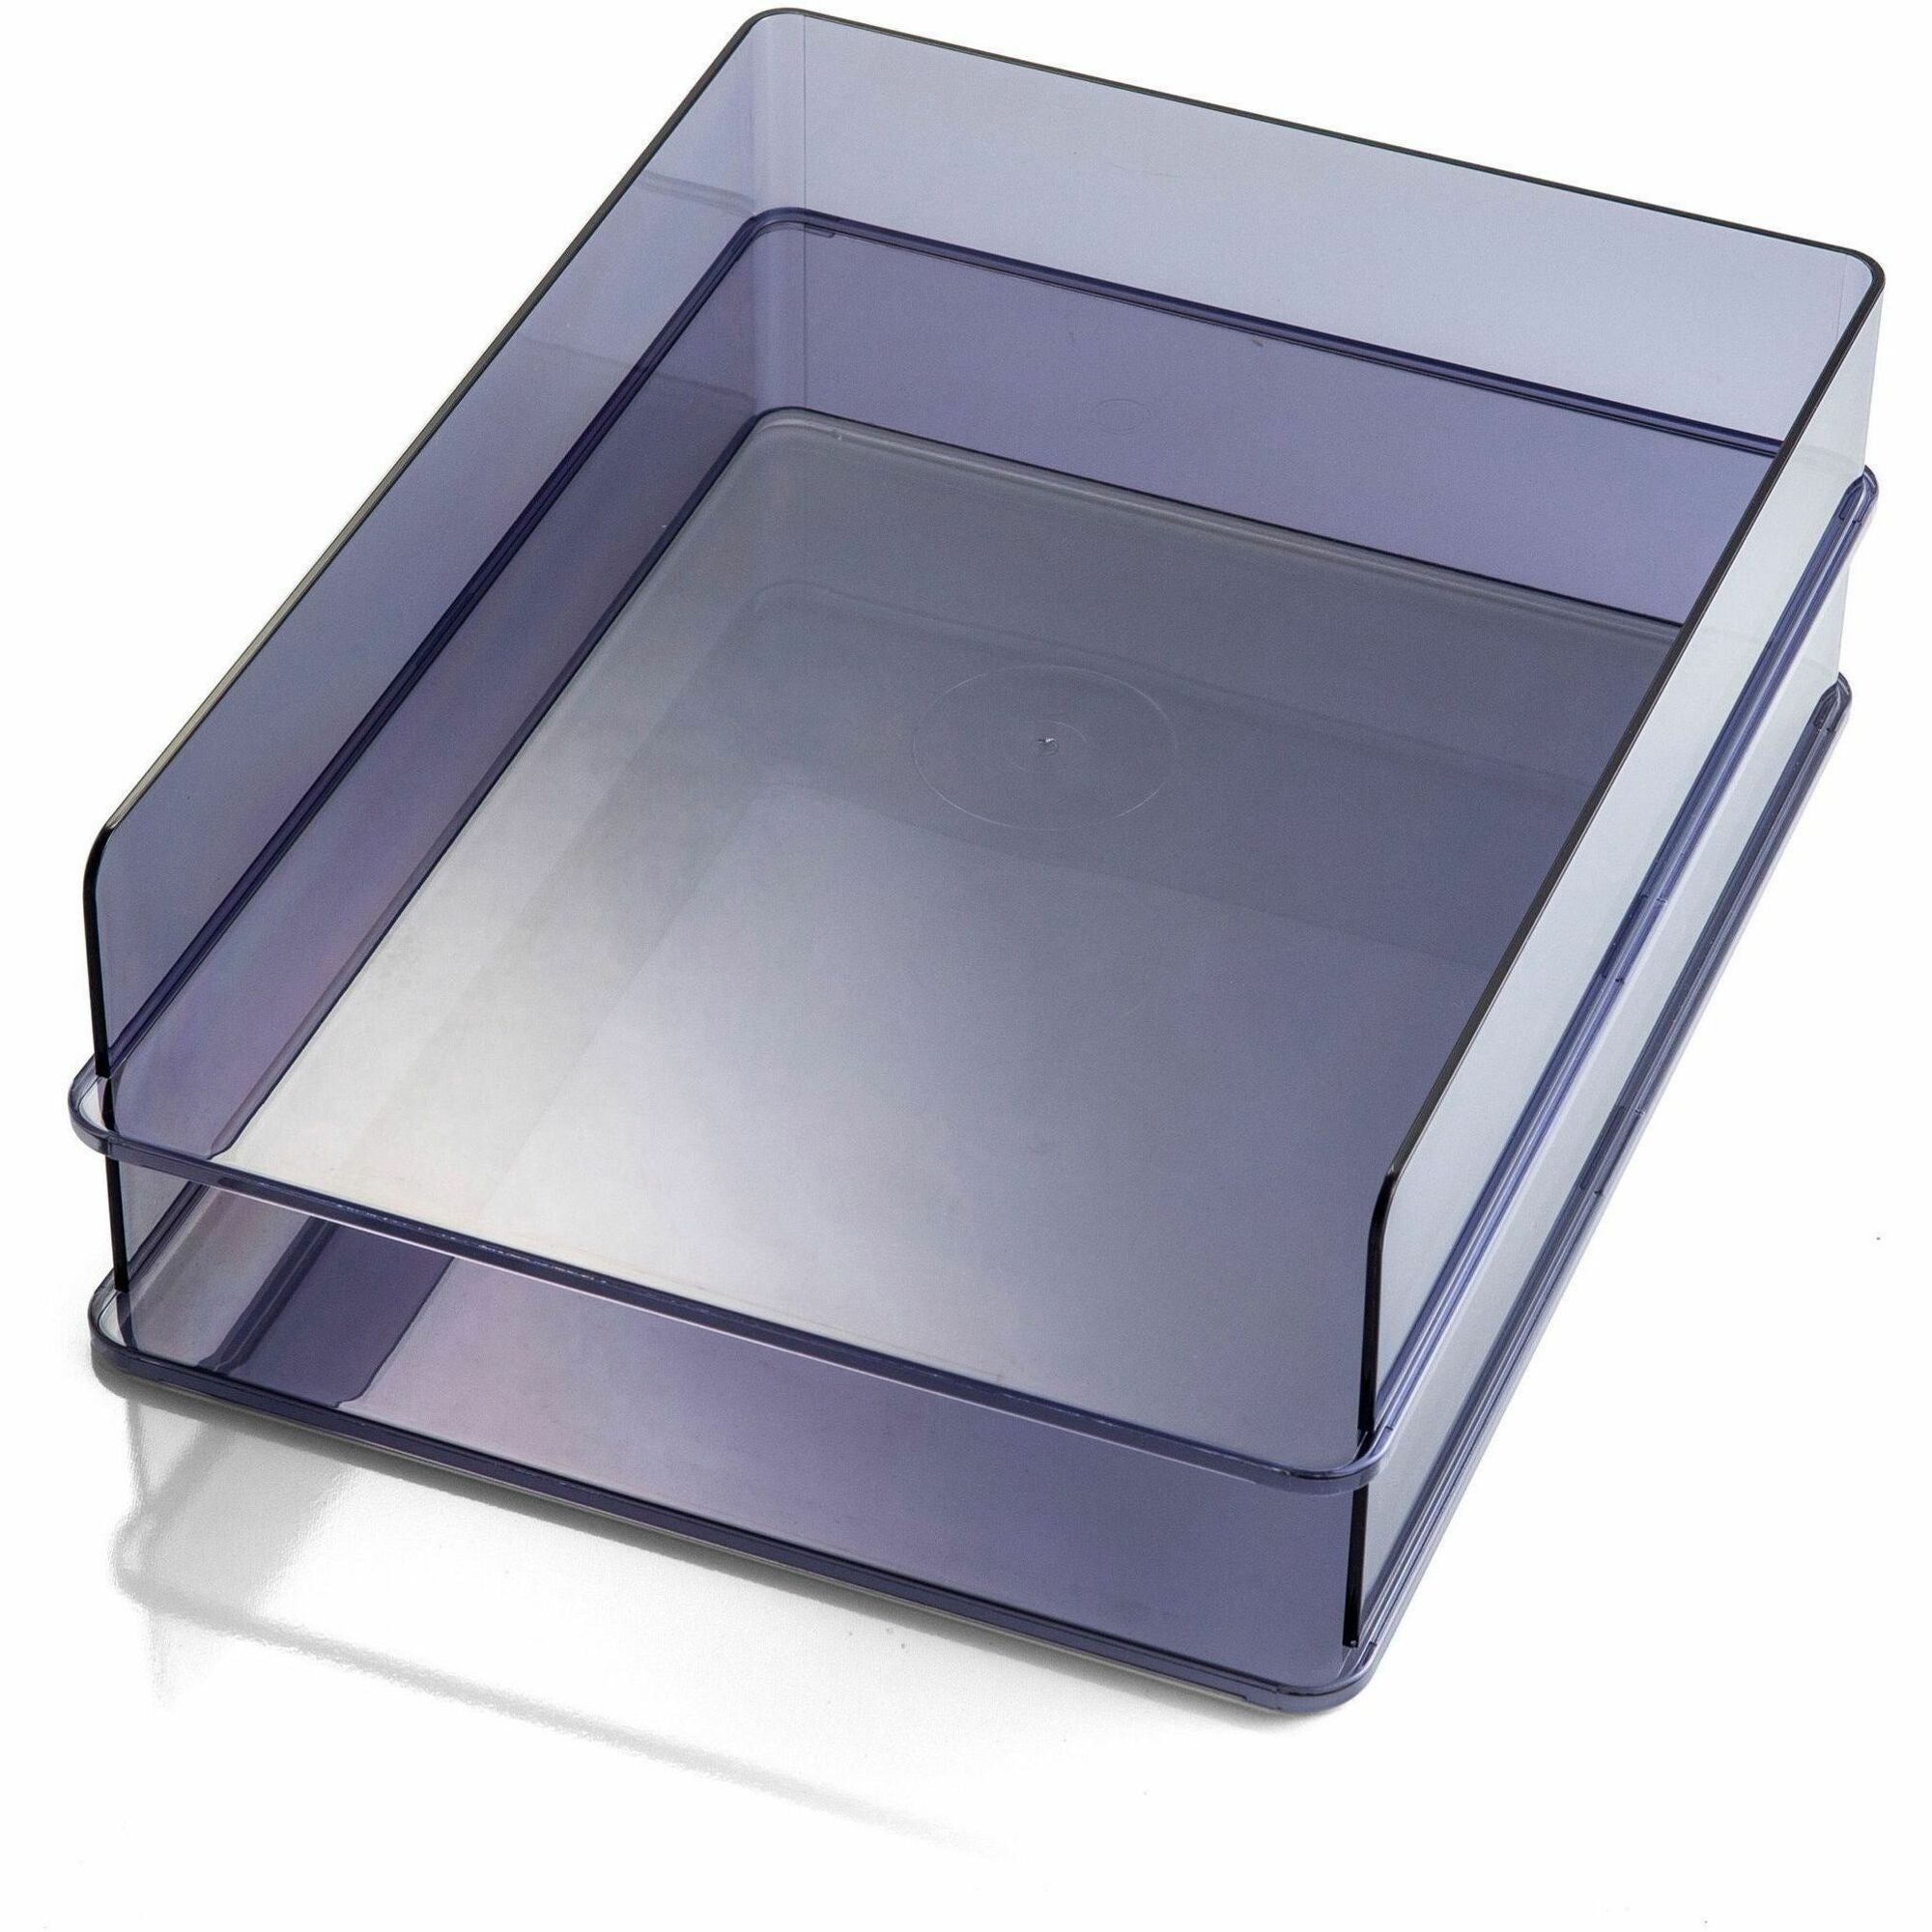 officemate-stackable-letter-trays-made-from-recycled-bottles-2pk-28-height-x-128-width-x-102-depthdesktop-stackable-translucent-gray-plastic-2-pack_oic21040 - 1